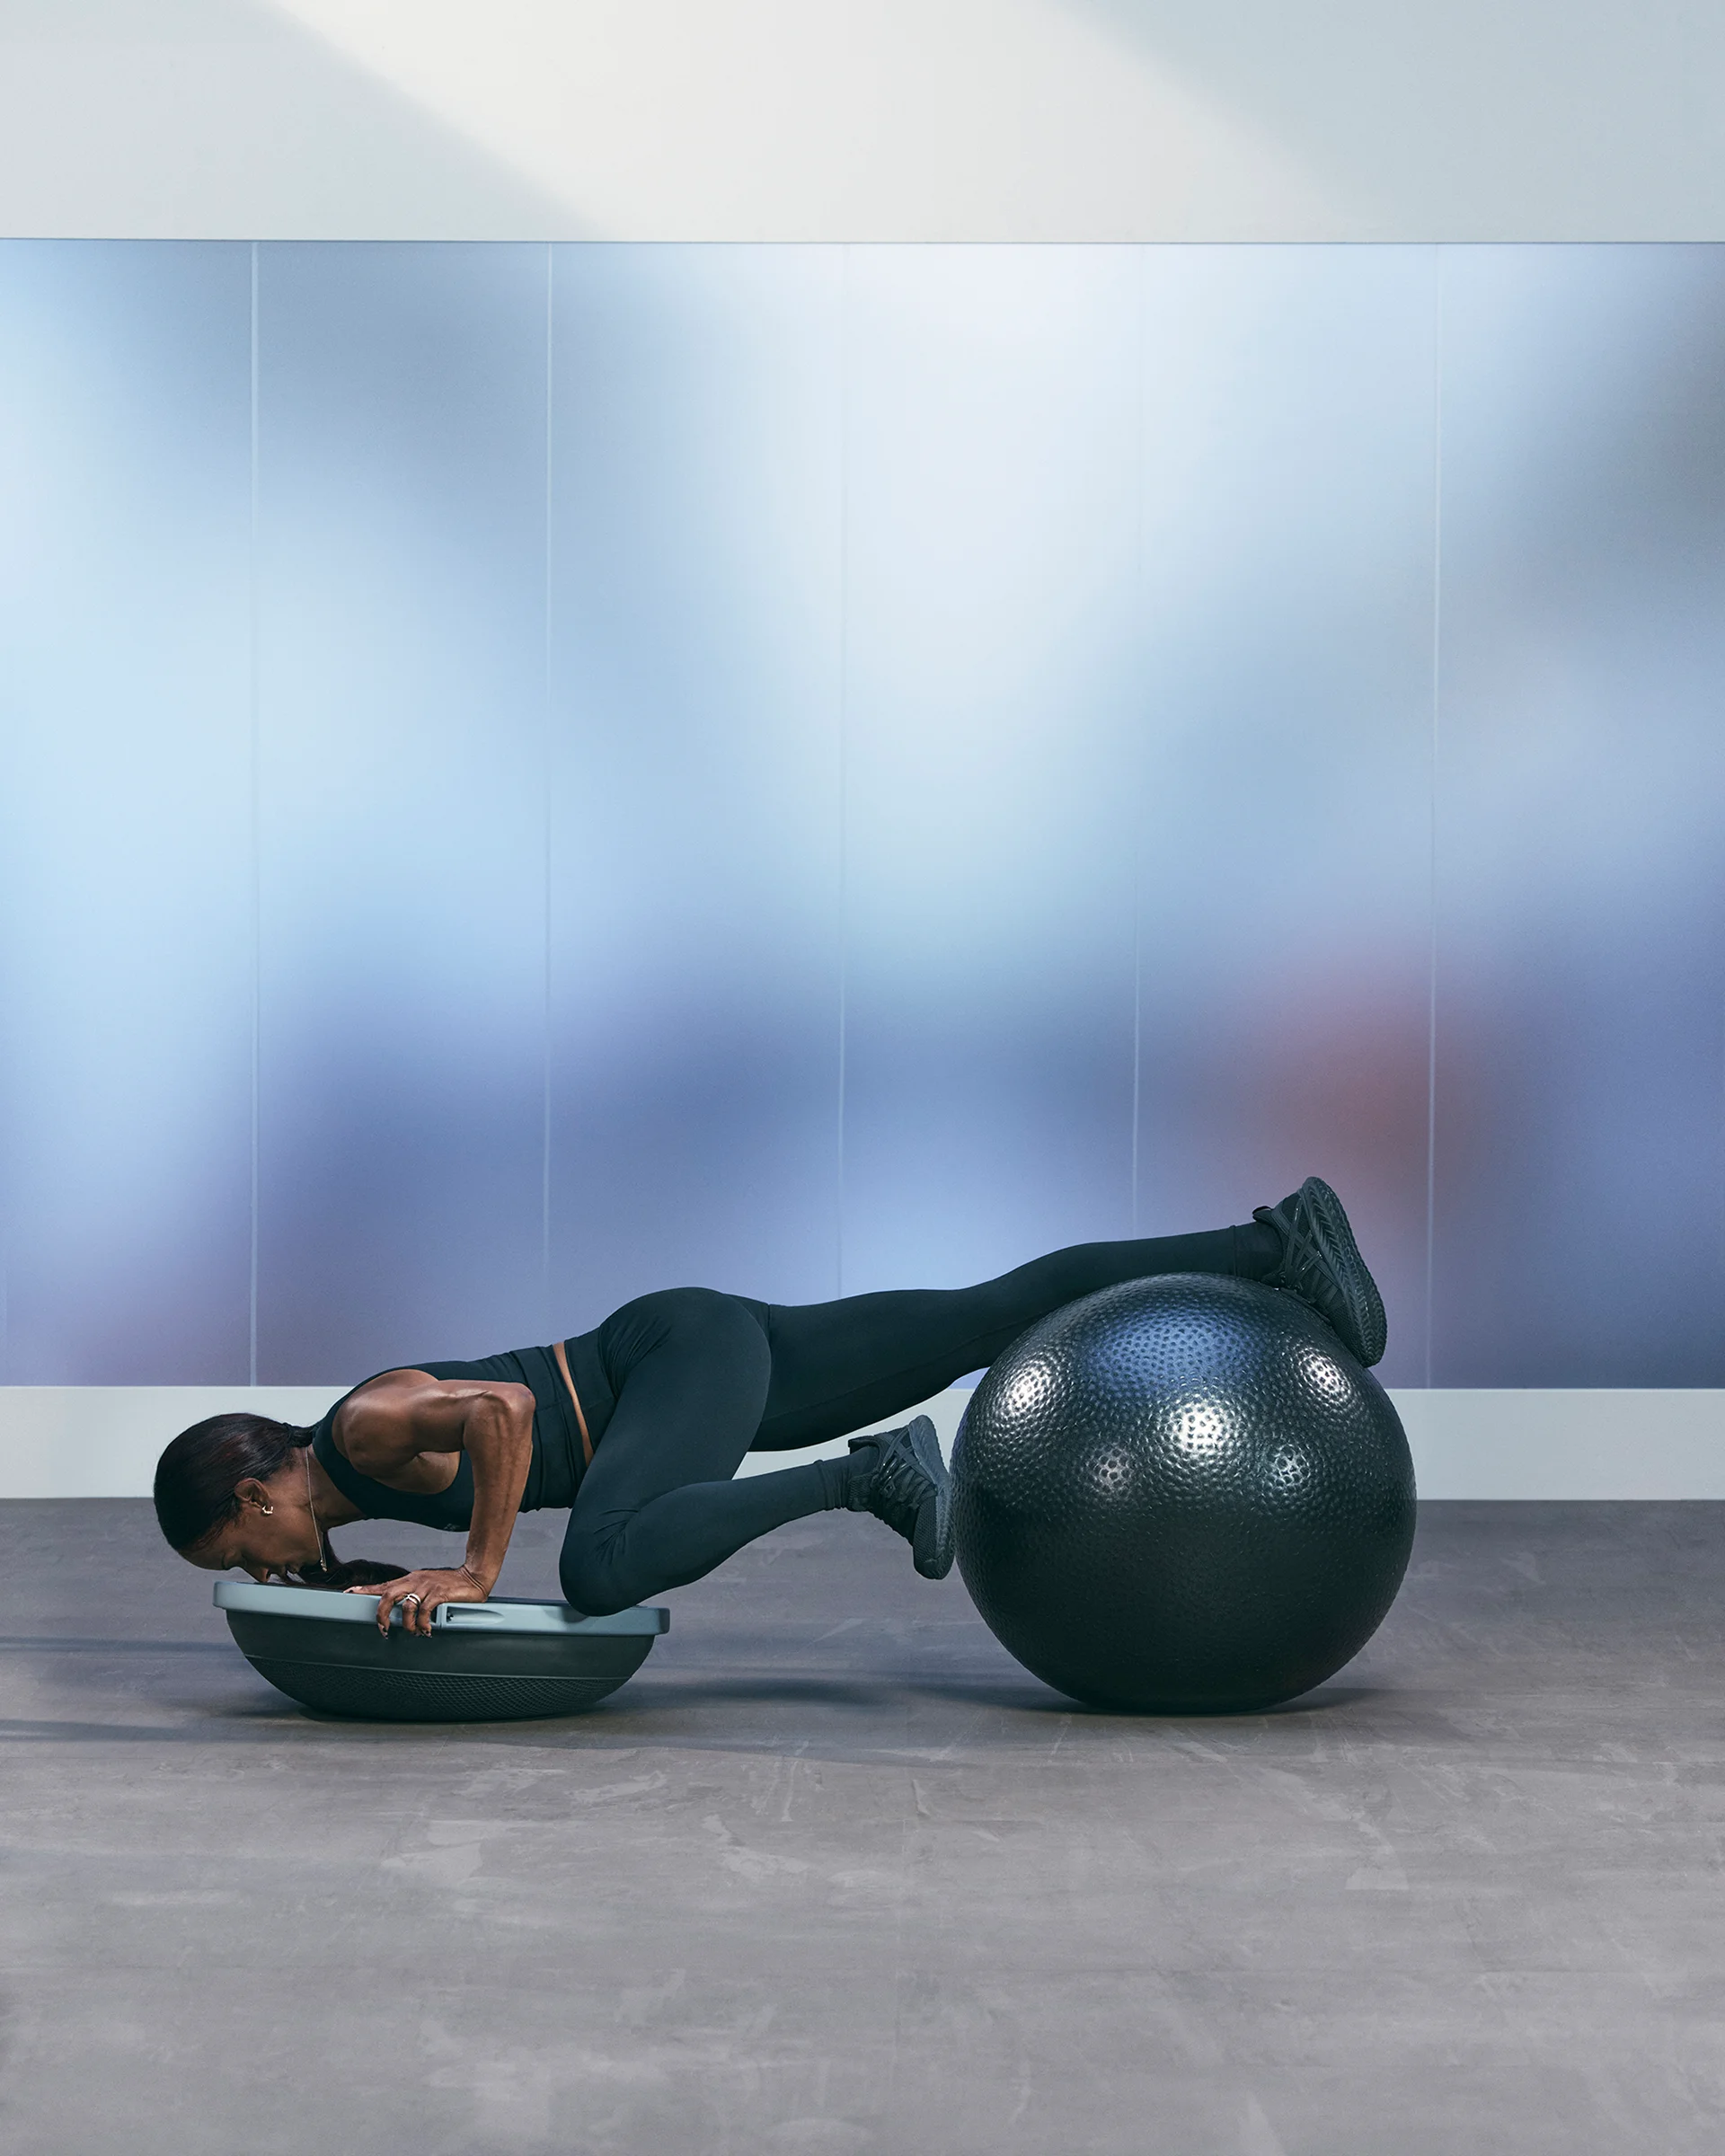 A Life Time member doing a pushup with a BOSU and stability ball.